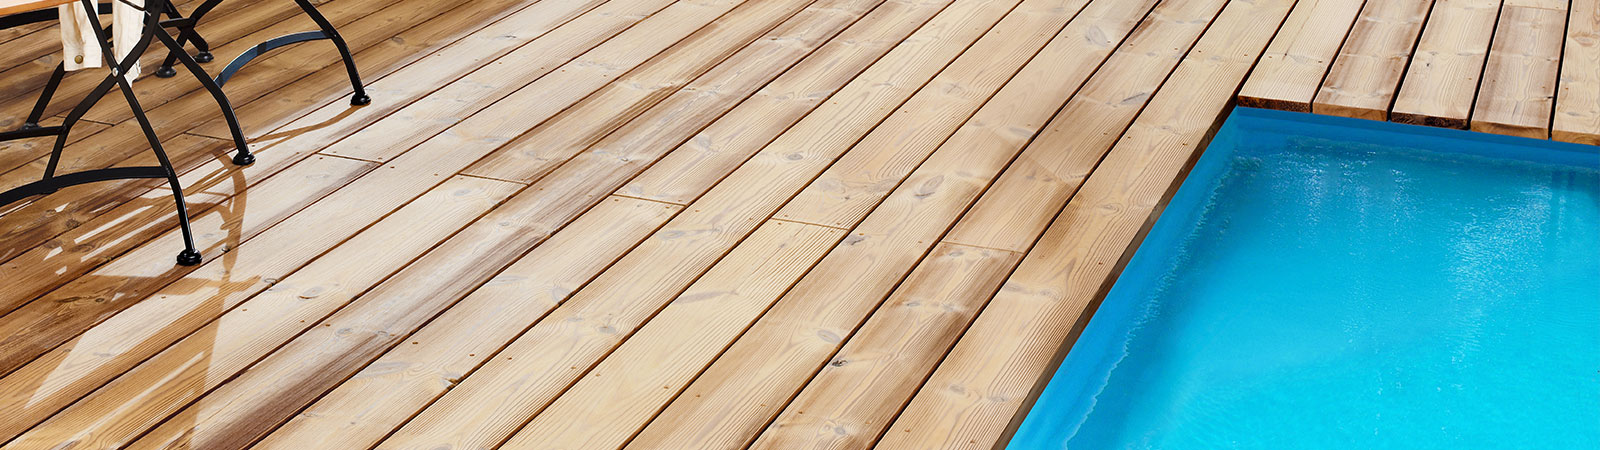 Finishes For Stairs Pedestals And Pool Decks Osmo Holz Und Color Gmbh Co Kg